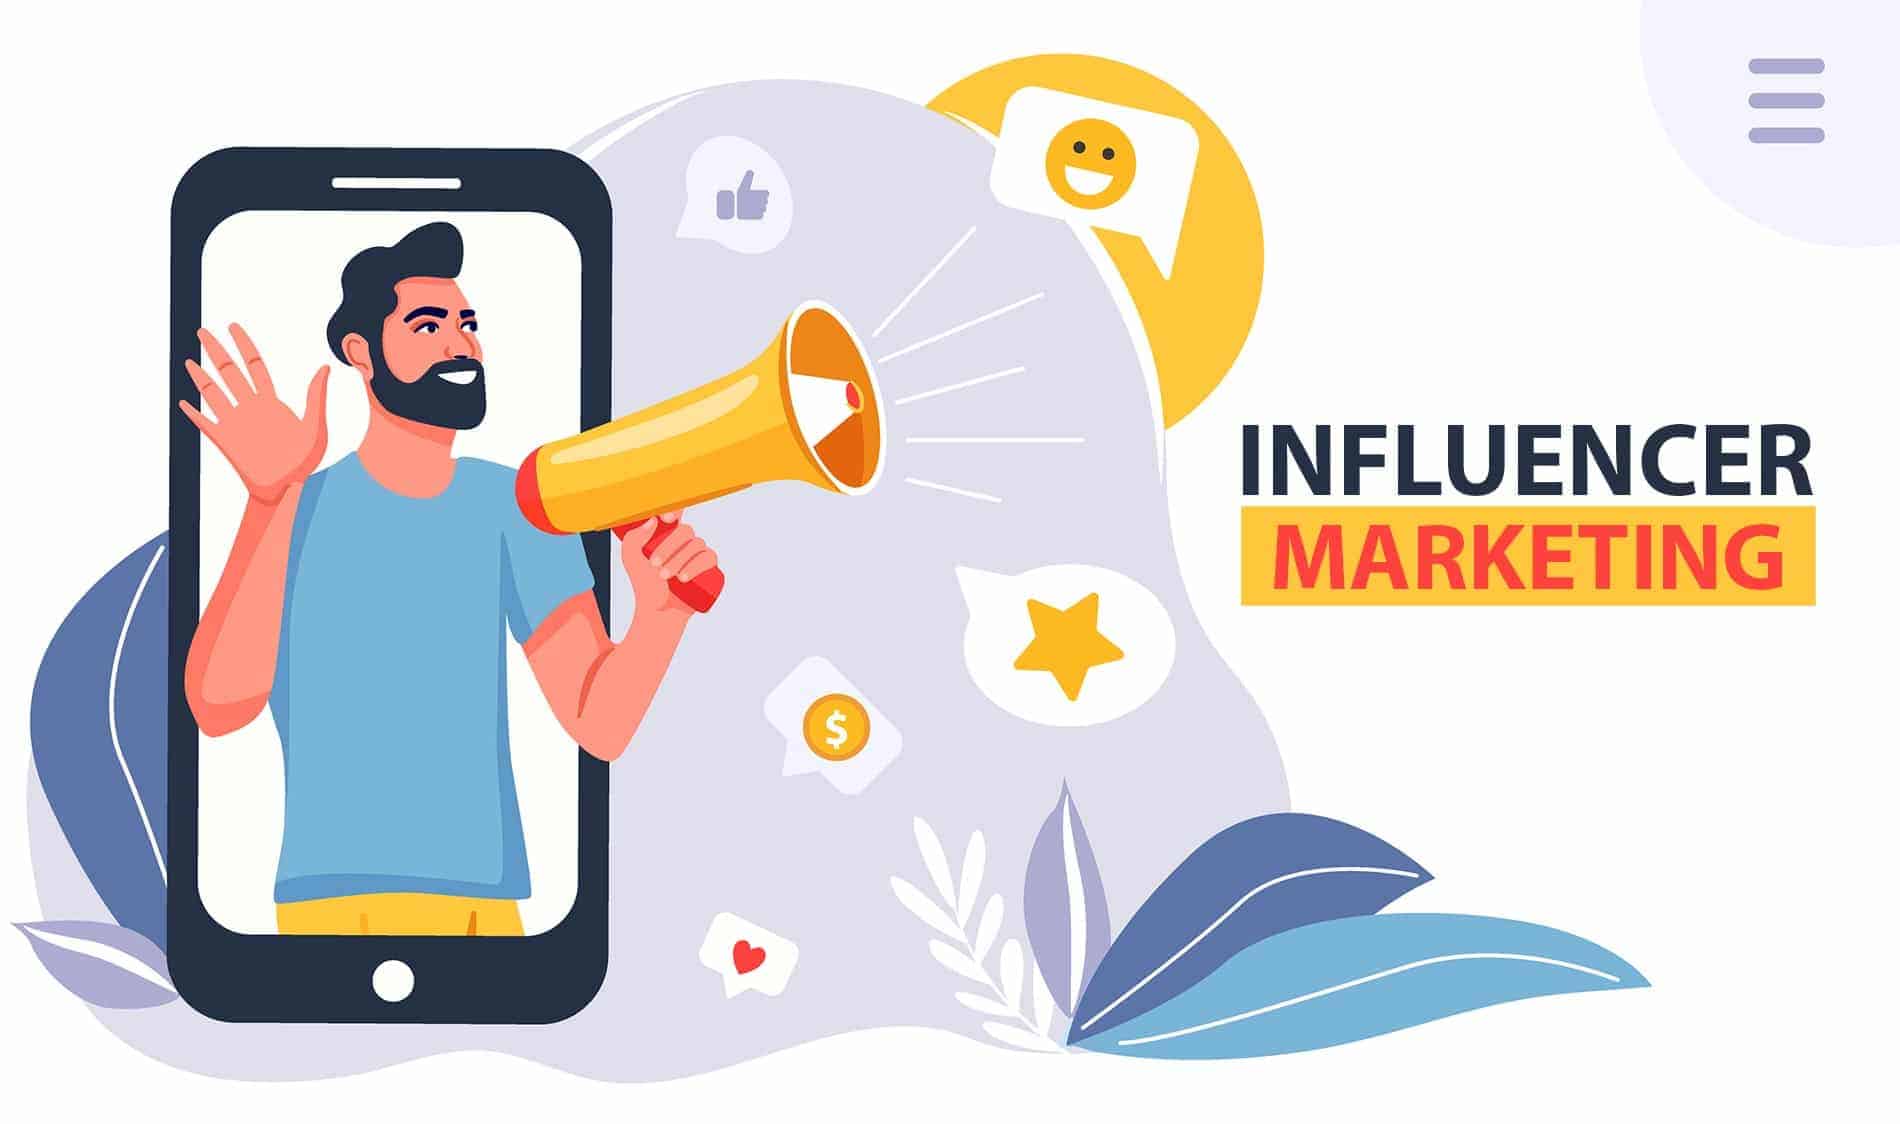 Why Are Companies Focusing More on Influencer Marketing